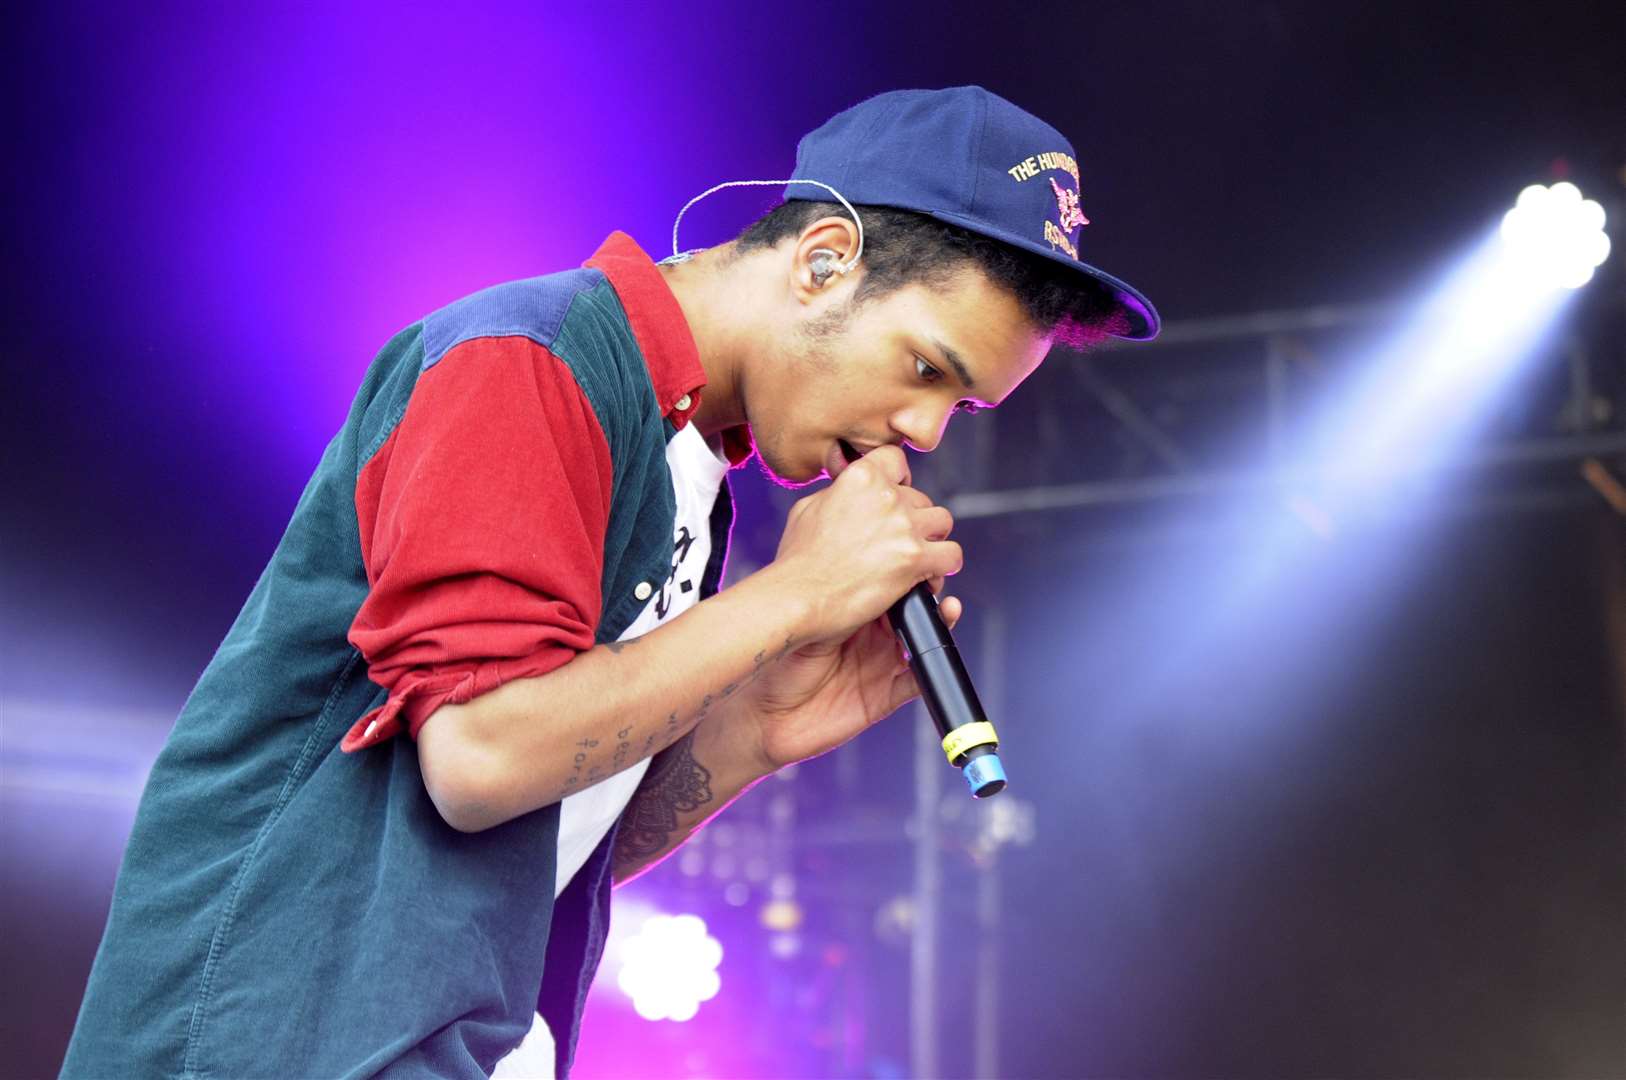 Rizzle Kicks on stage at Leeds Castle following the torch's arrival